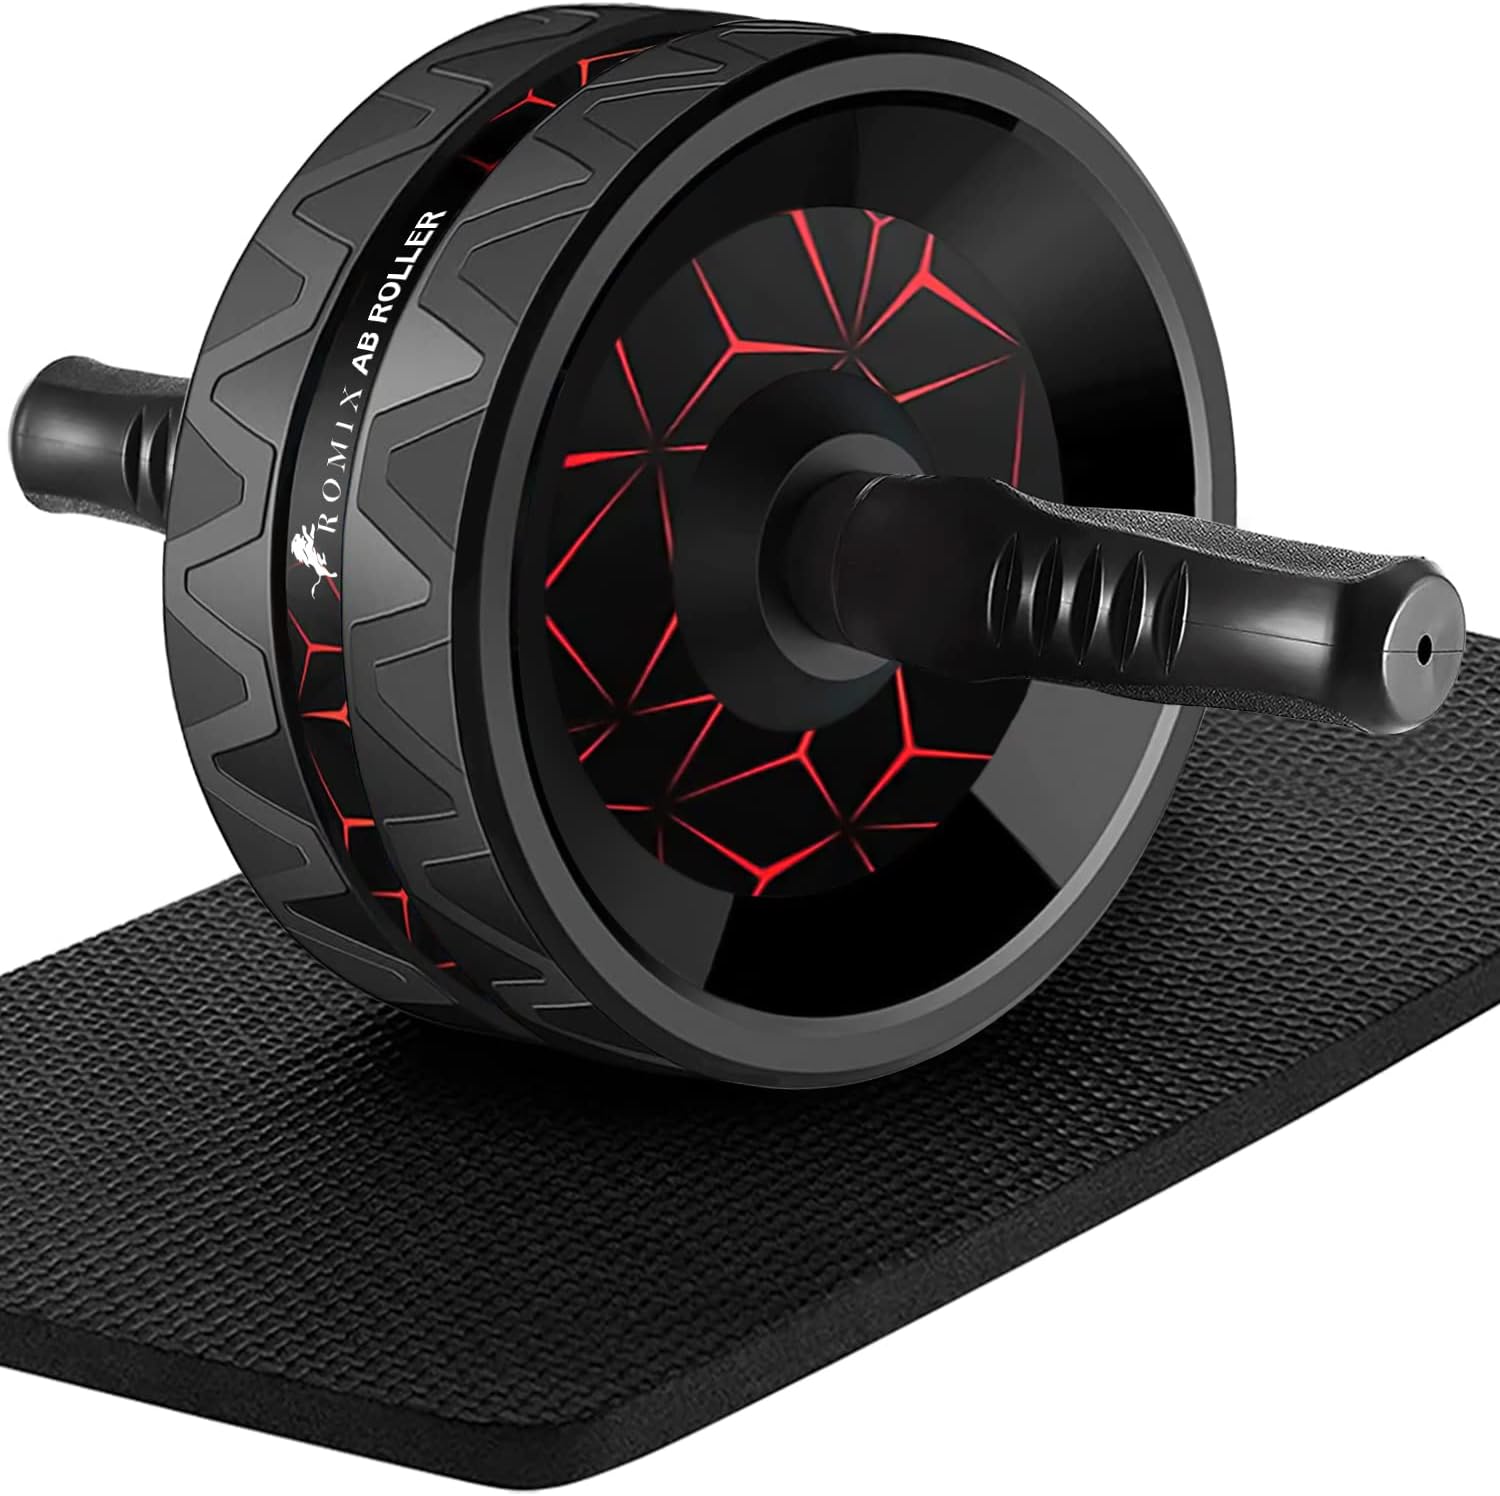 A black and red exercise wheel on a black mat, providing a fitness tool for physical activity.